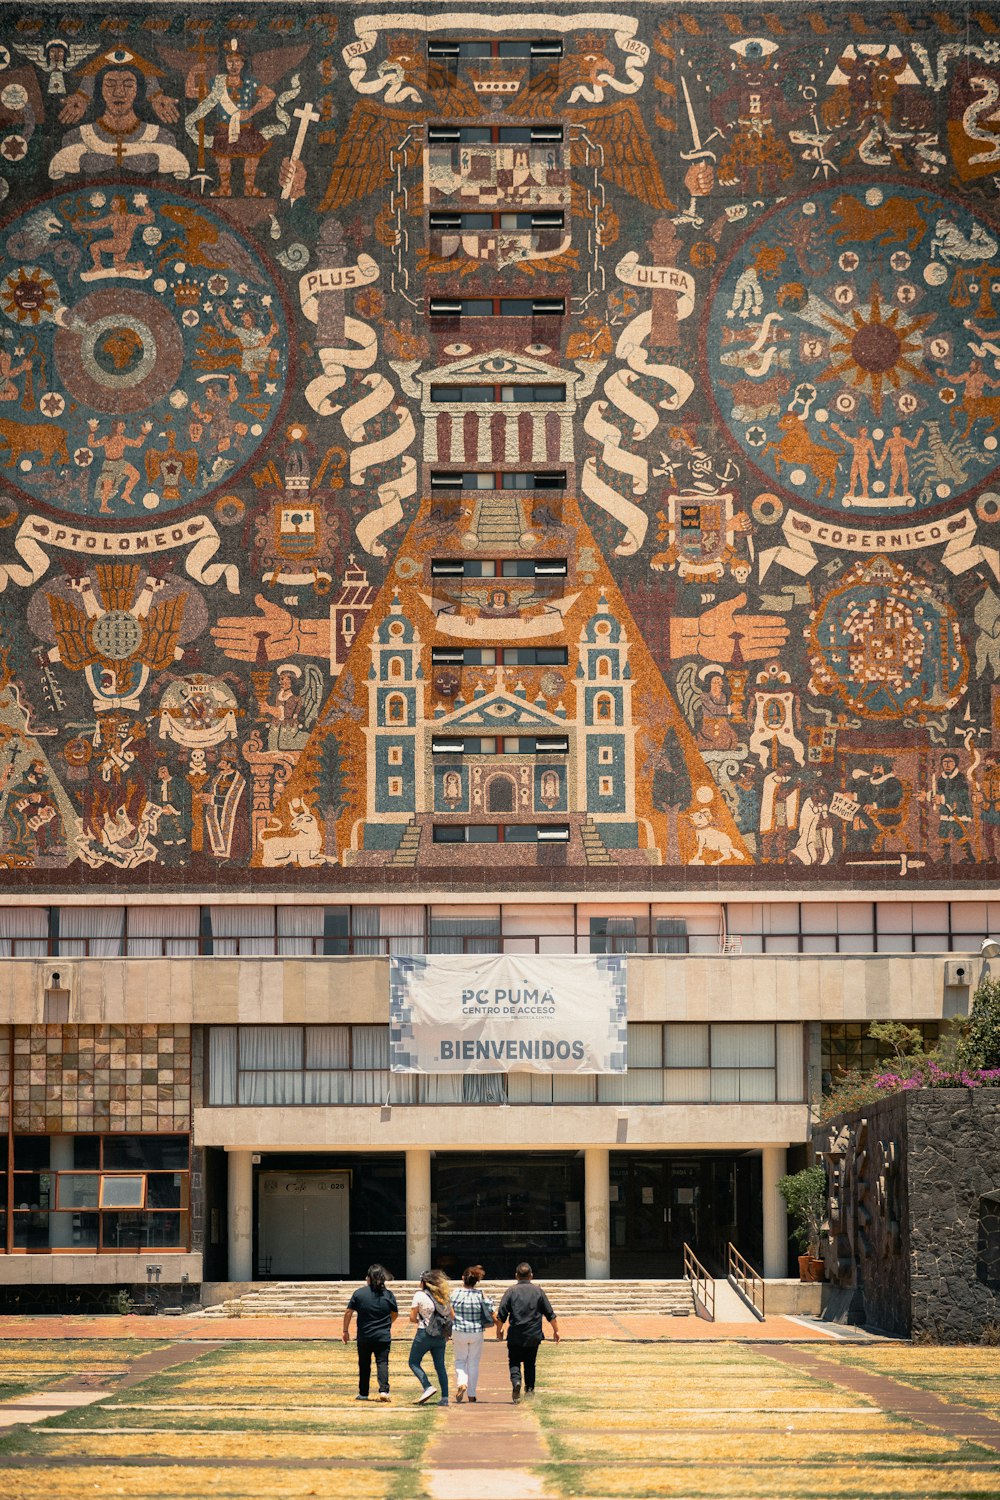 a building with a large mural on the wall